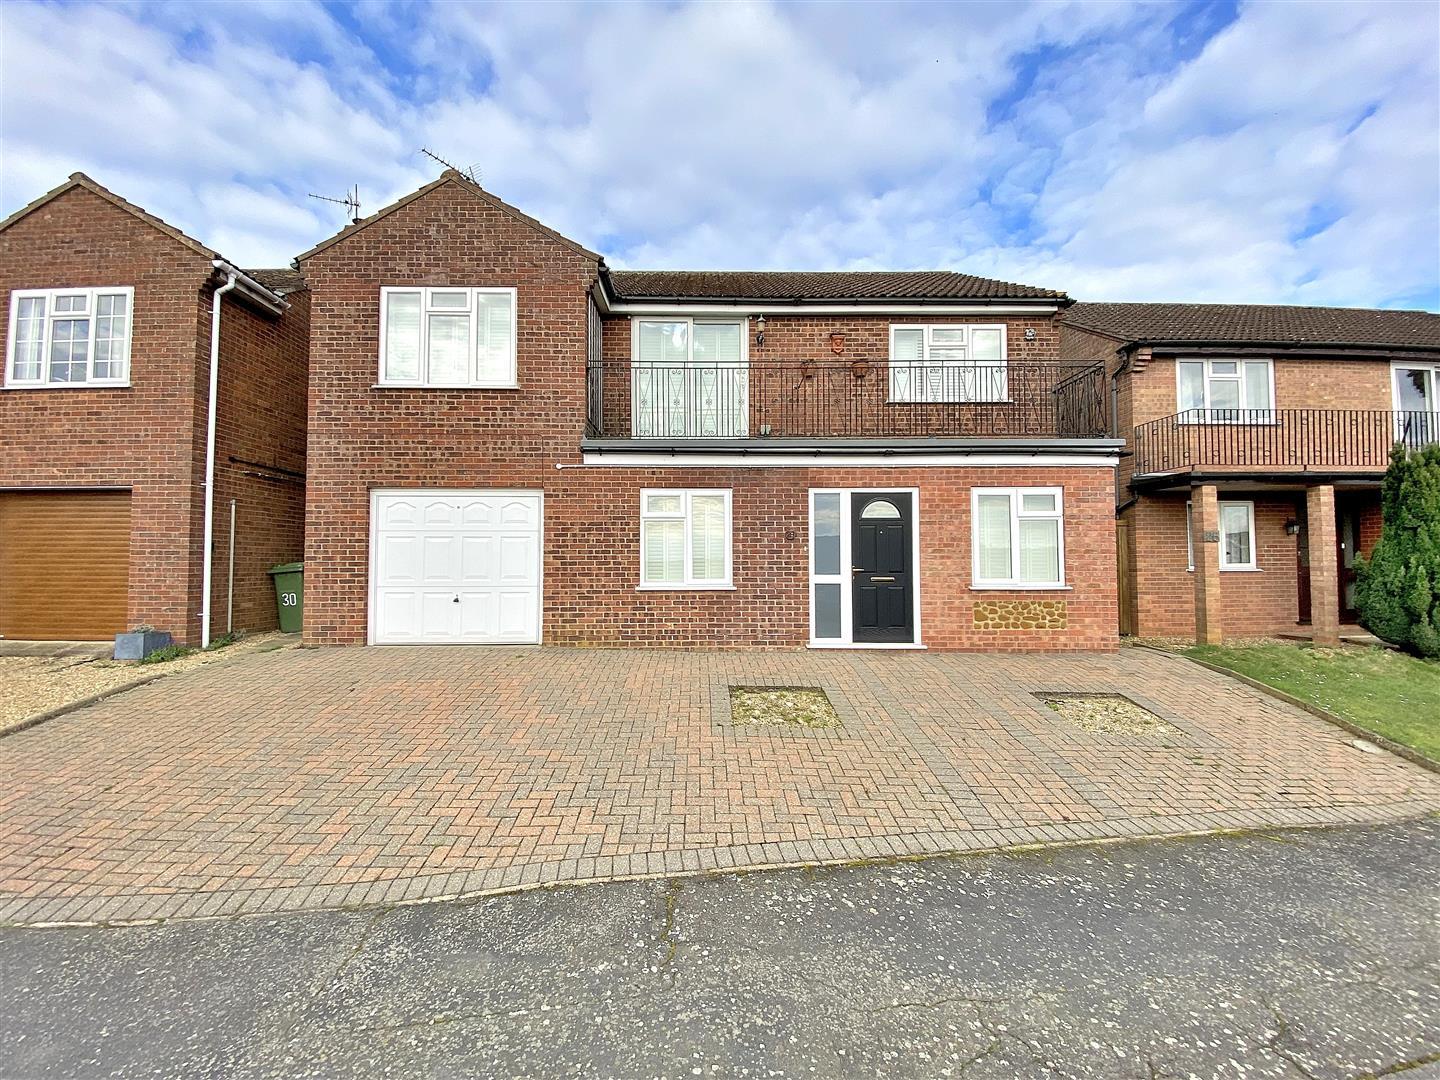 3 bed detached house for sale in Tudor Way, King's Lynn  - Property Image 1